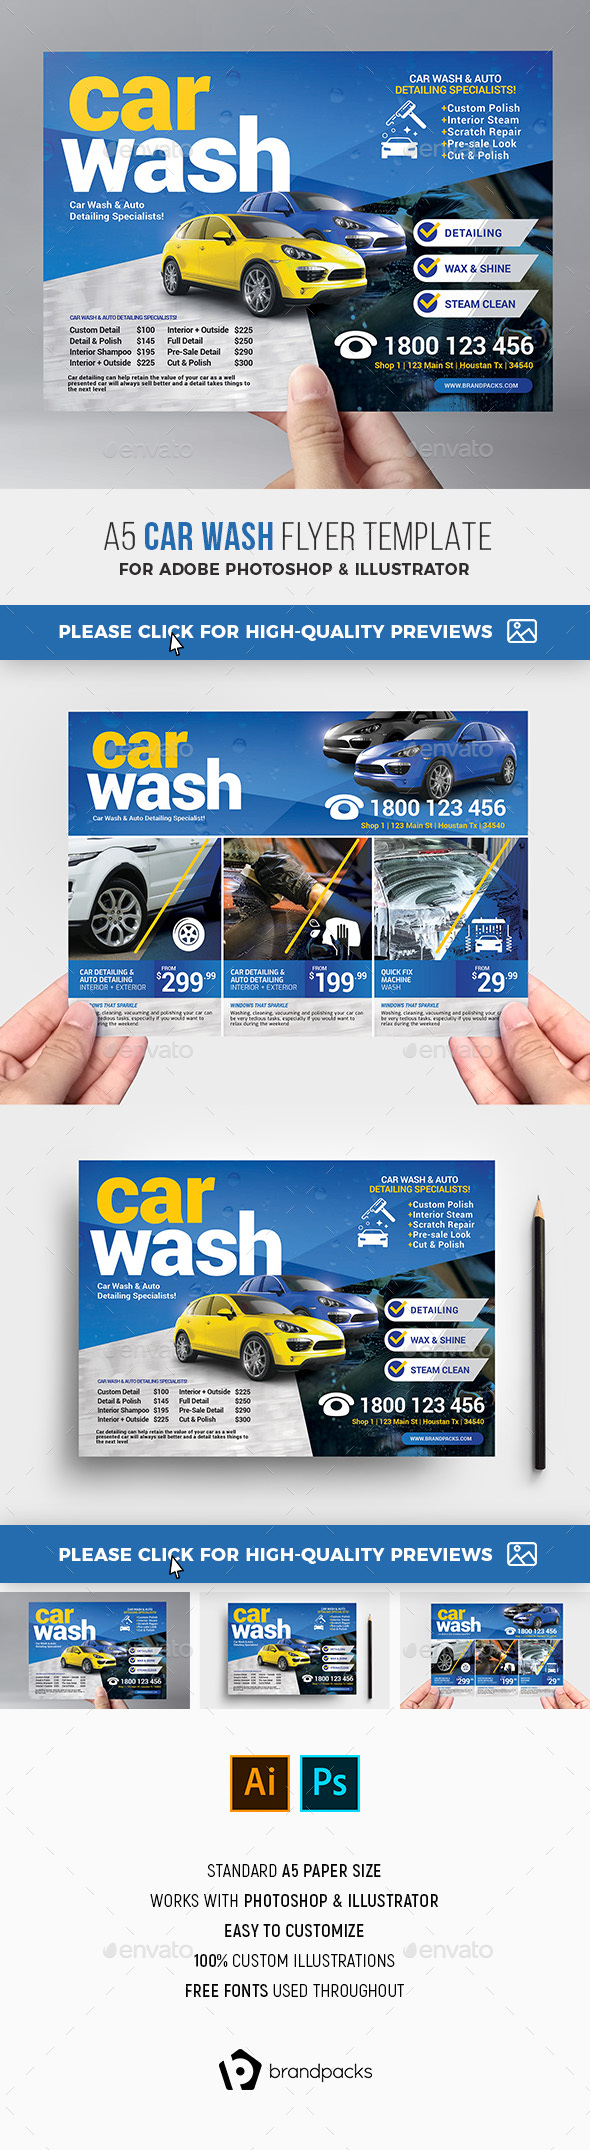 car-wash-flyers-template-for-your-needs